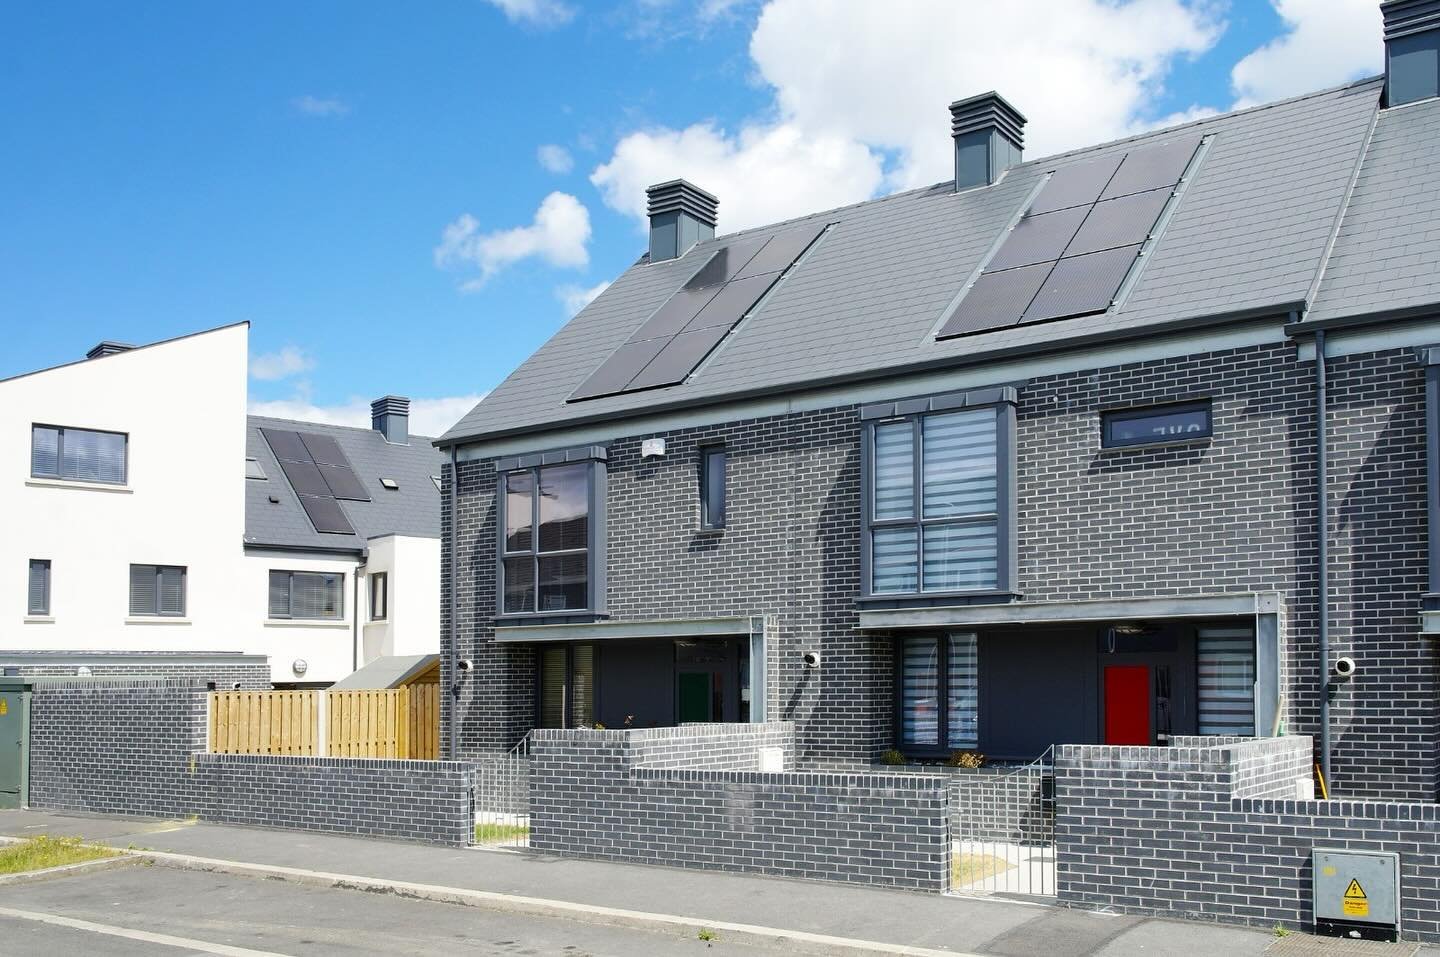 All of our homes have a minimum A2 energy rating.

#&Oacute;Cualann
#AffordableHousing
#The&Oacute;CualannModel
#SustainableHousing